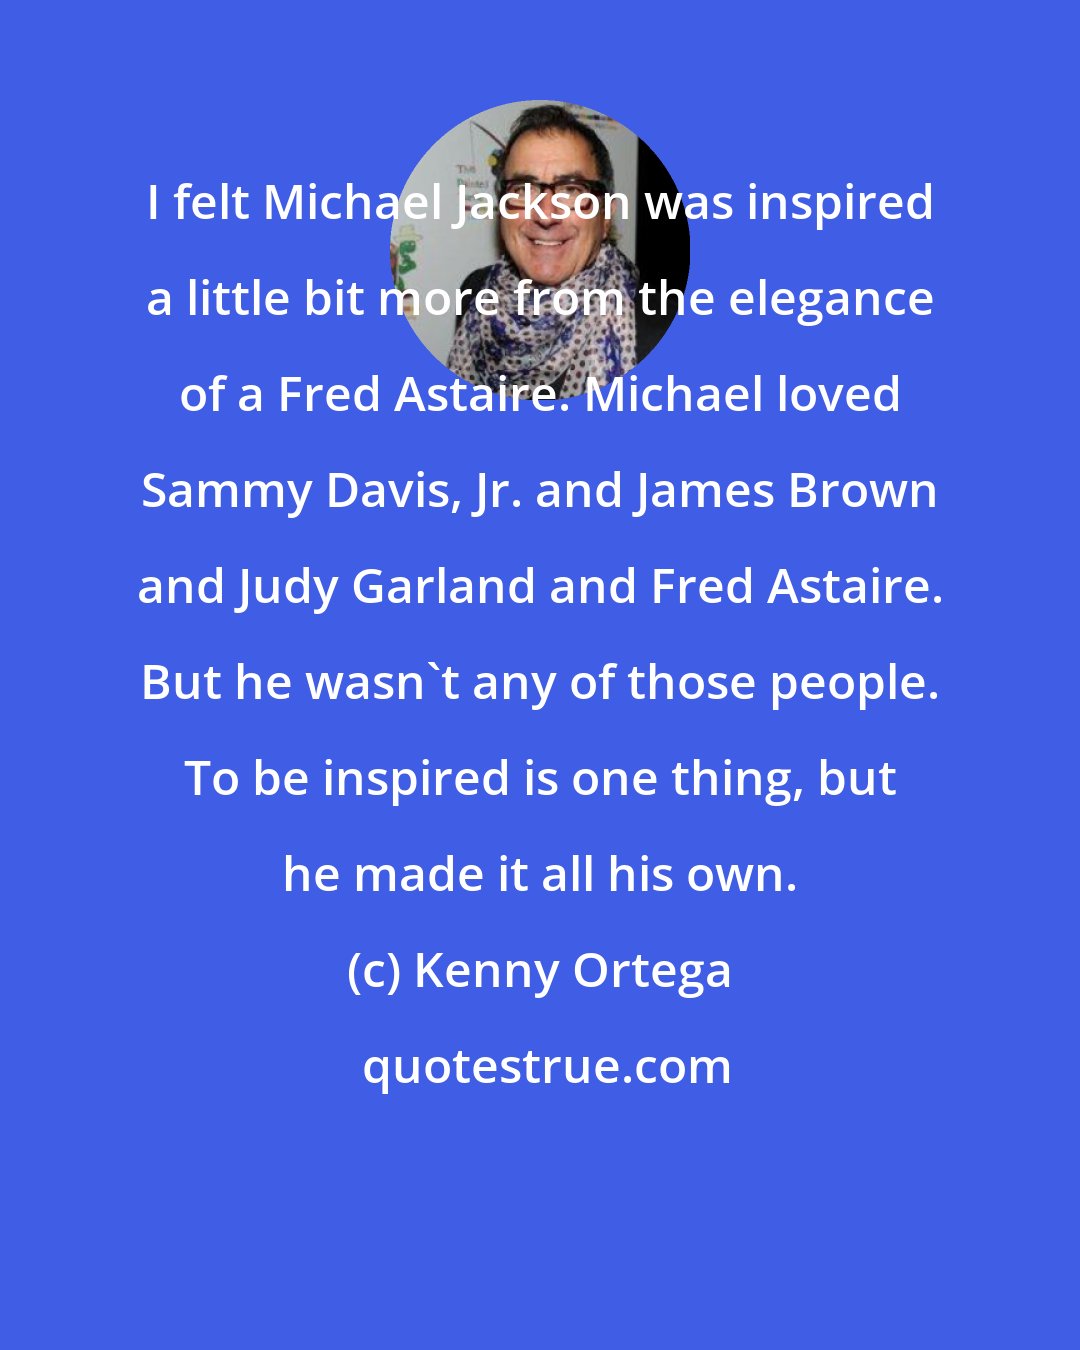 Kenny Ortega: I felt Michael Jackson was inspired a little bit more from the elegance of a Fred Astaire. Michael loved Sammy Davis, Jr. and James Brown and Judy Garland and Fred Astaire. But he wasn't any of those people. To be inspired is one thing, but he made it all his own.